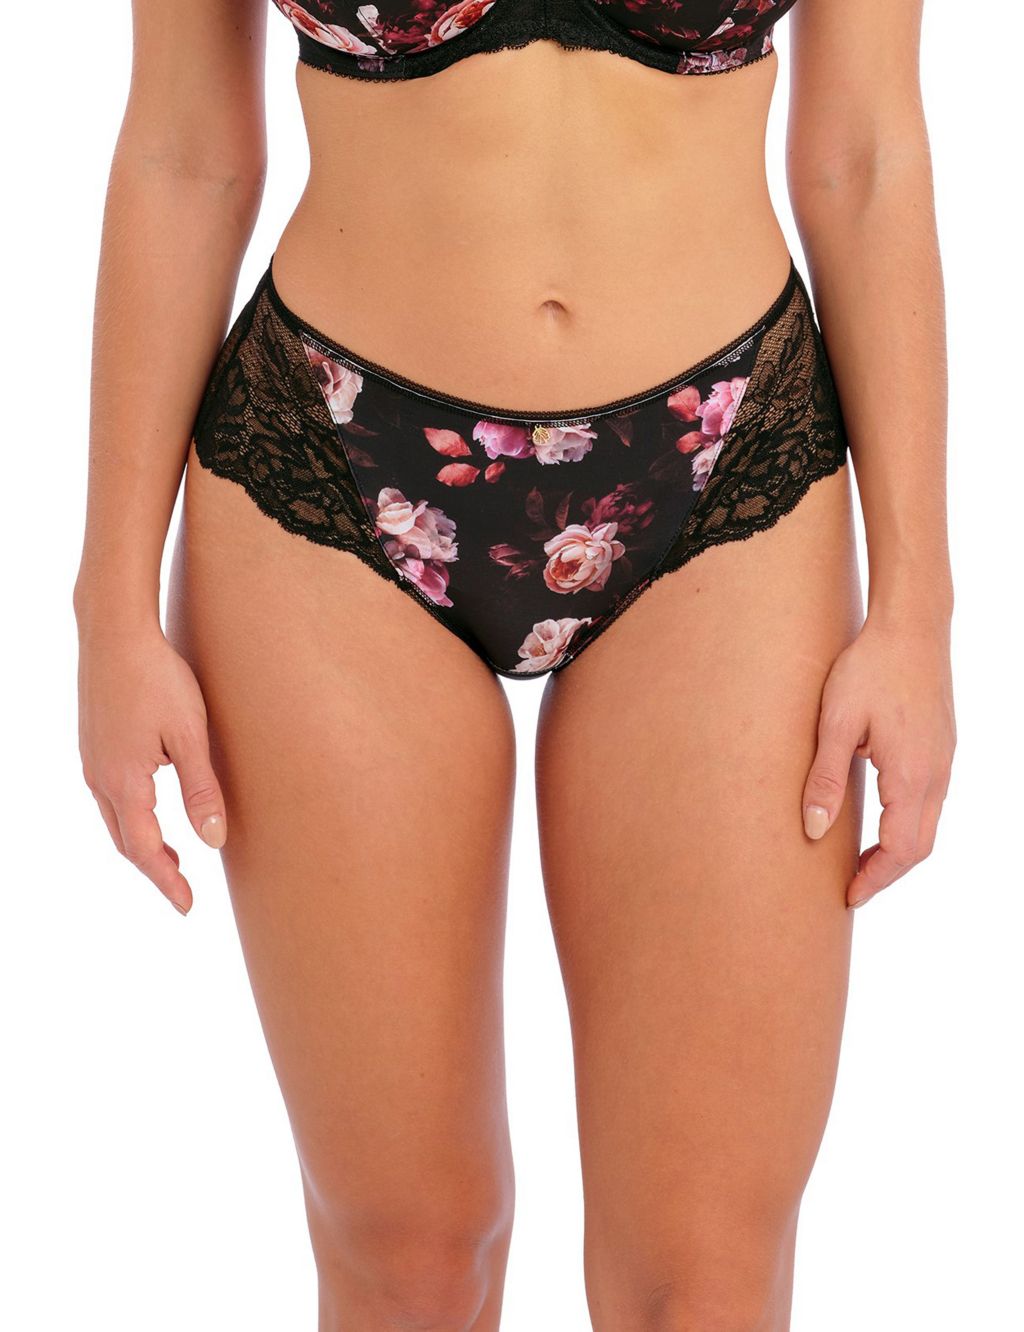 Pippa Lace Floral Knicker Shorts image 3